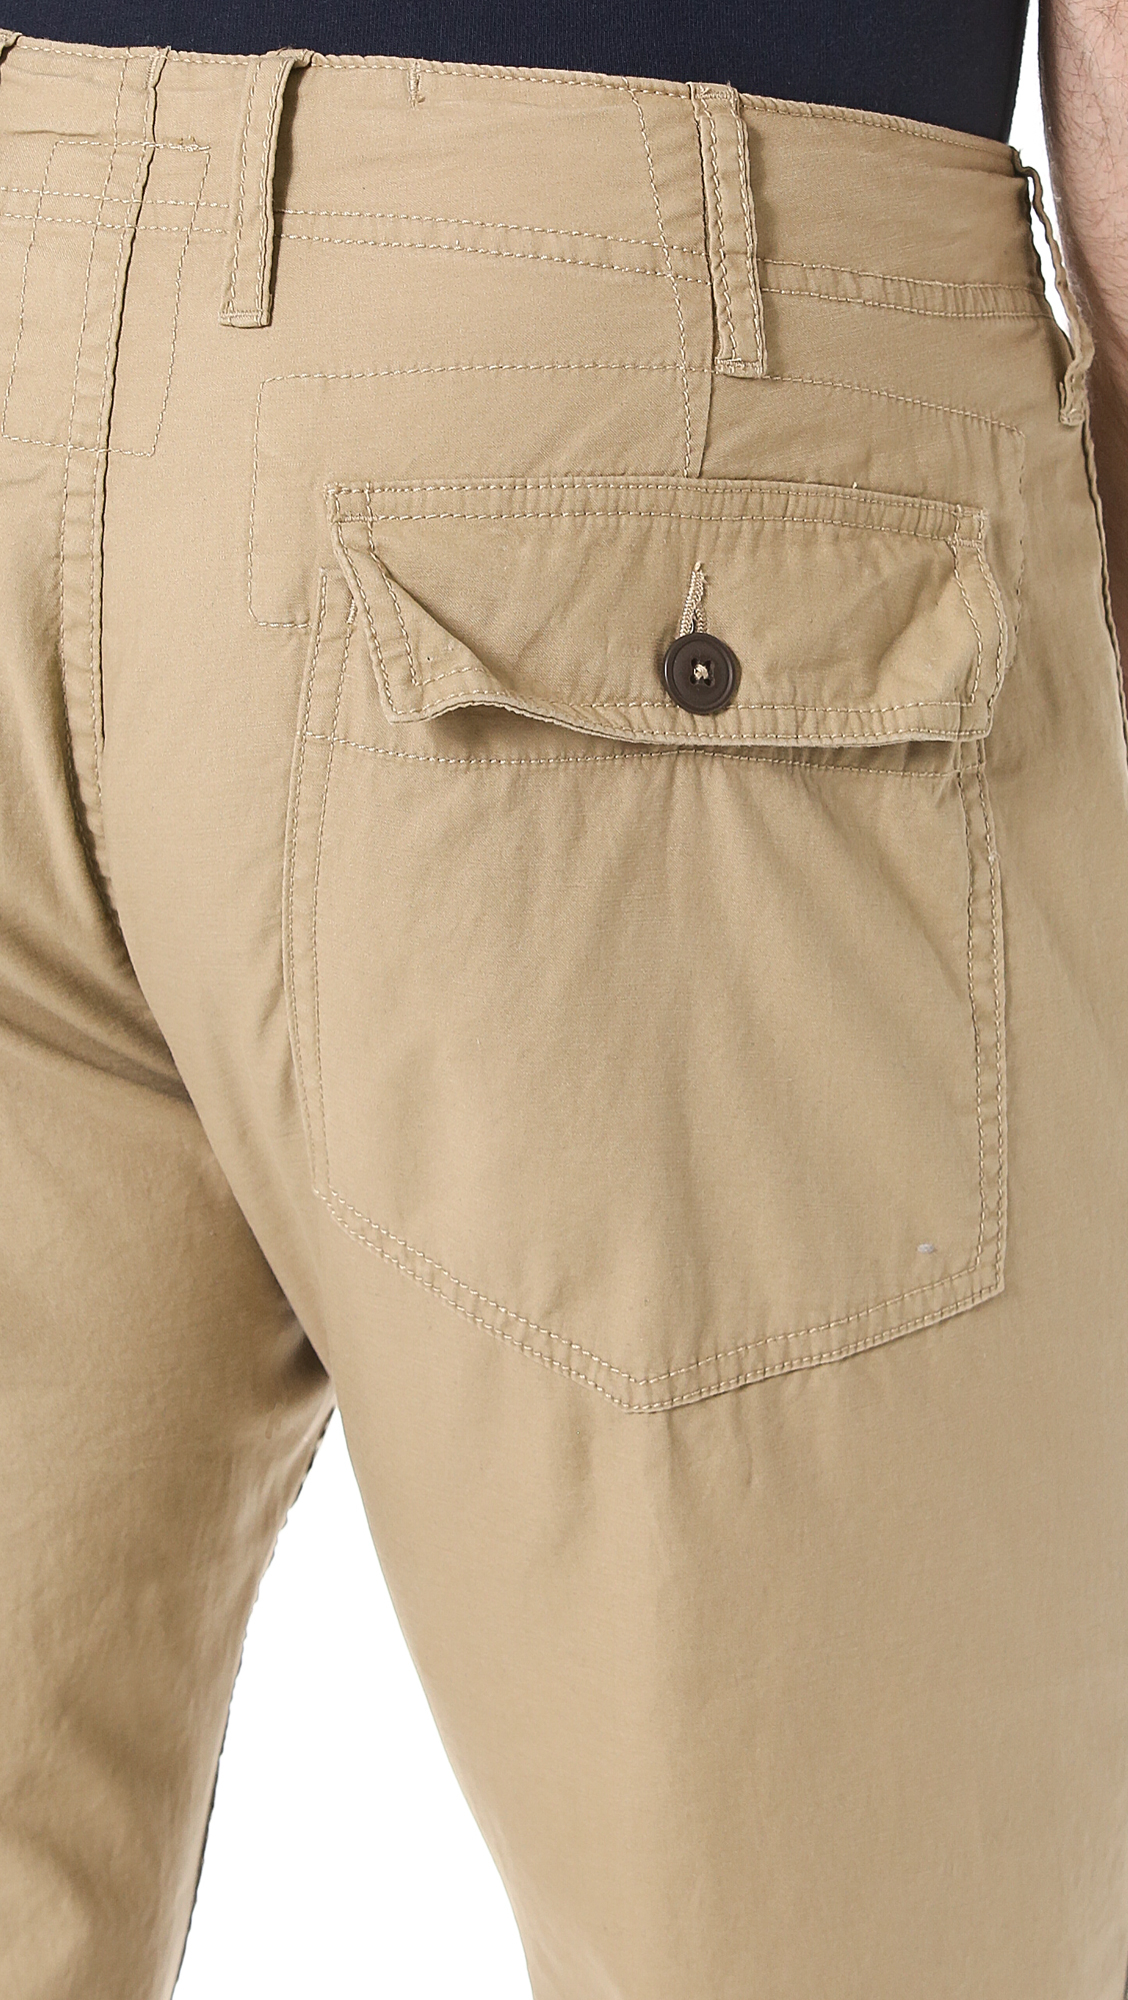 Lyst - Relwen Lightweight Supply Pants in Natural for Men